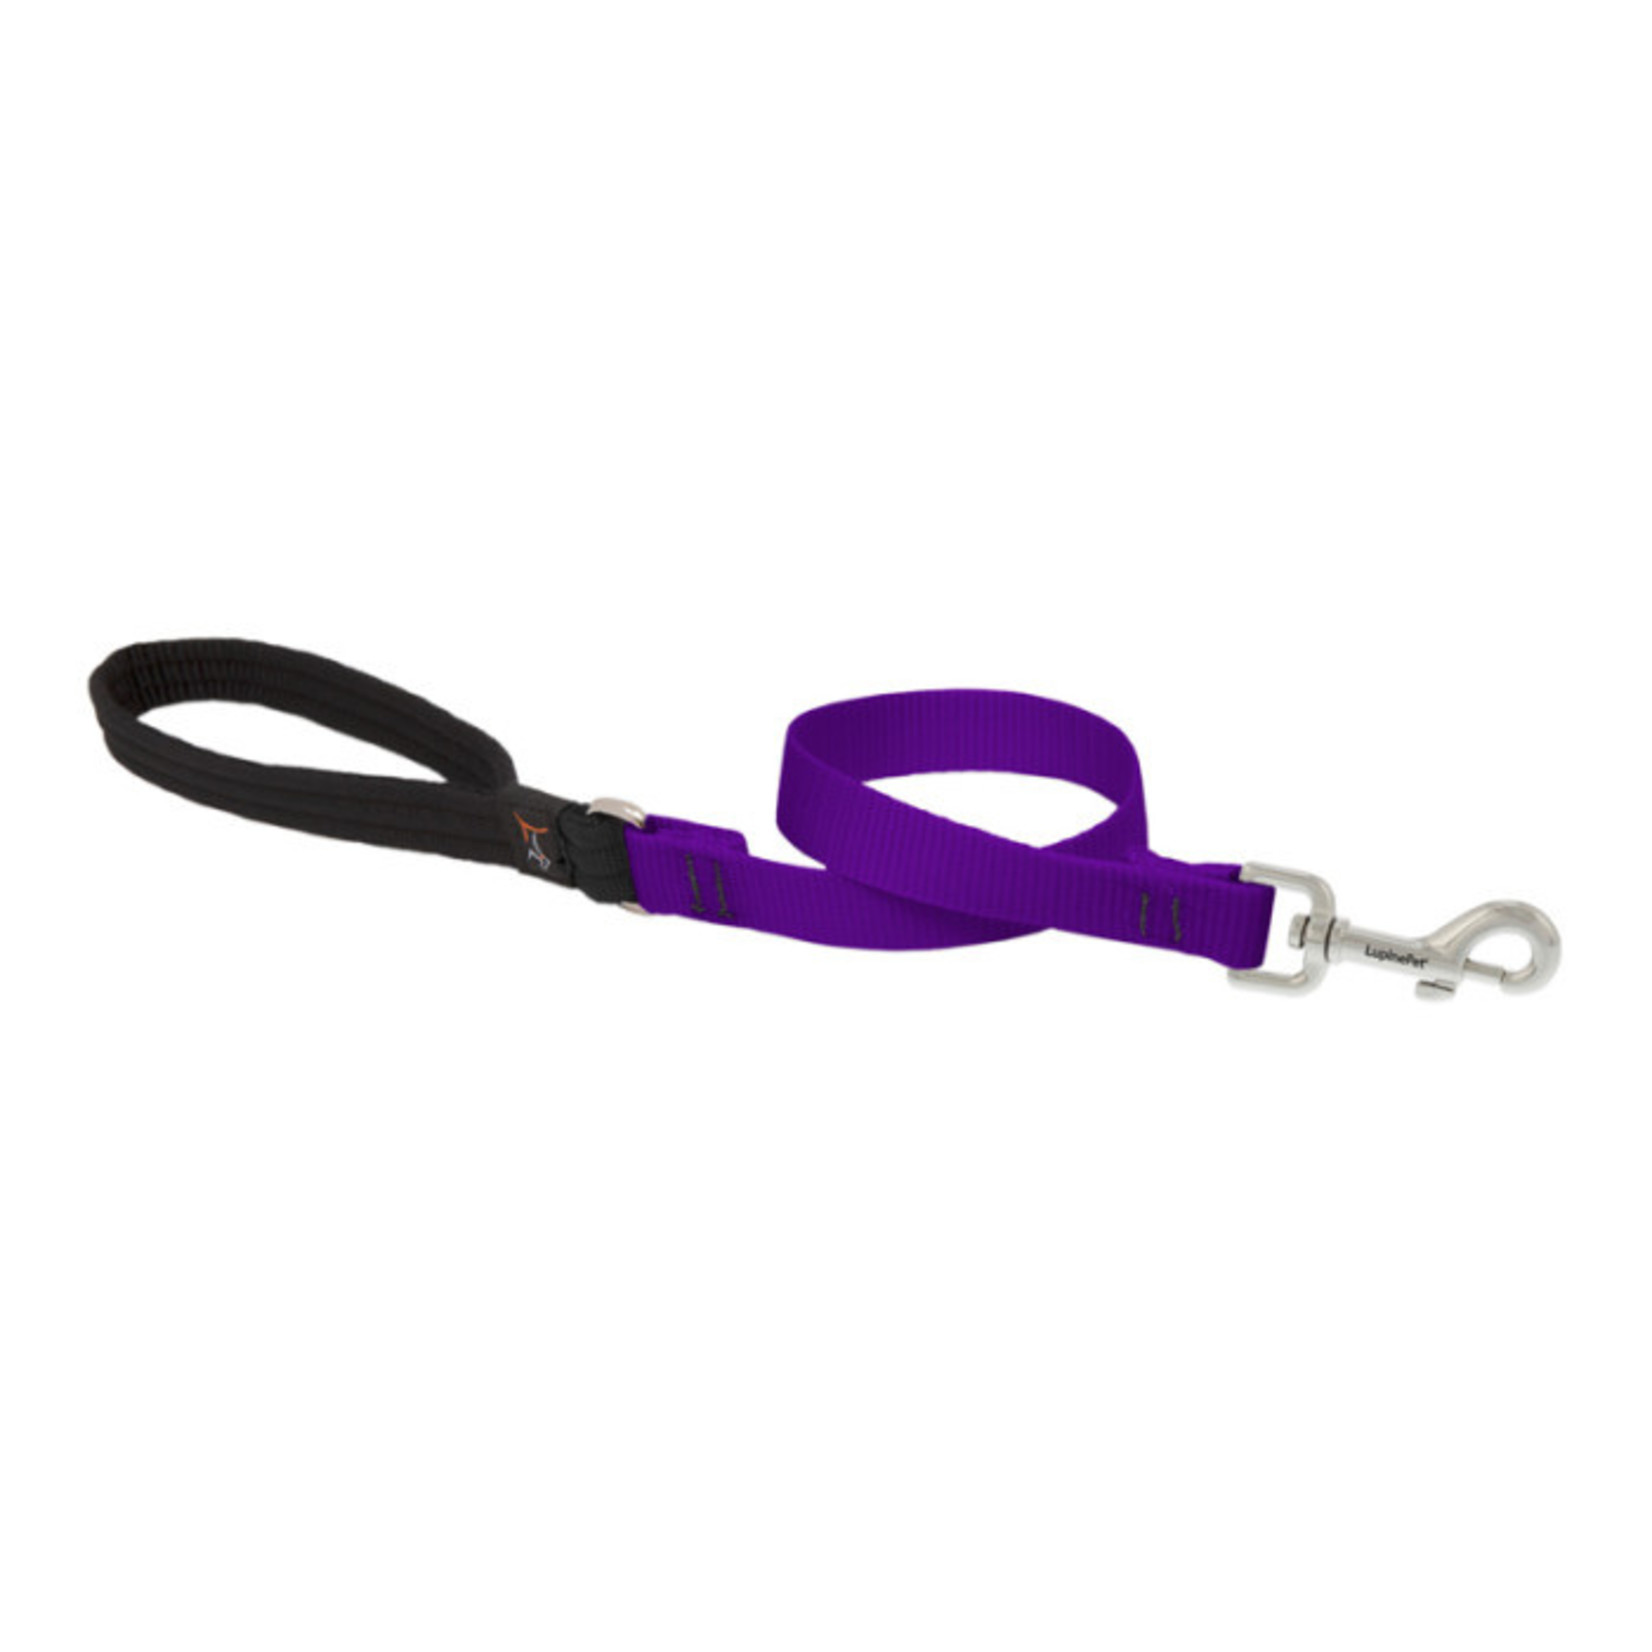 Lupine Lupine 3/4in Wide Dog Leads with Padded Handle in 4ft or 6ft Length Assorted Colors